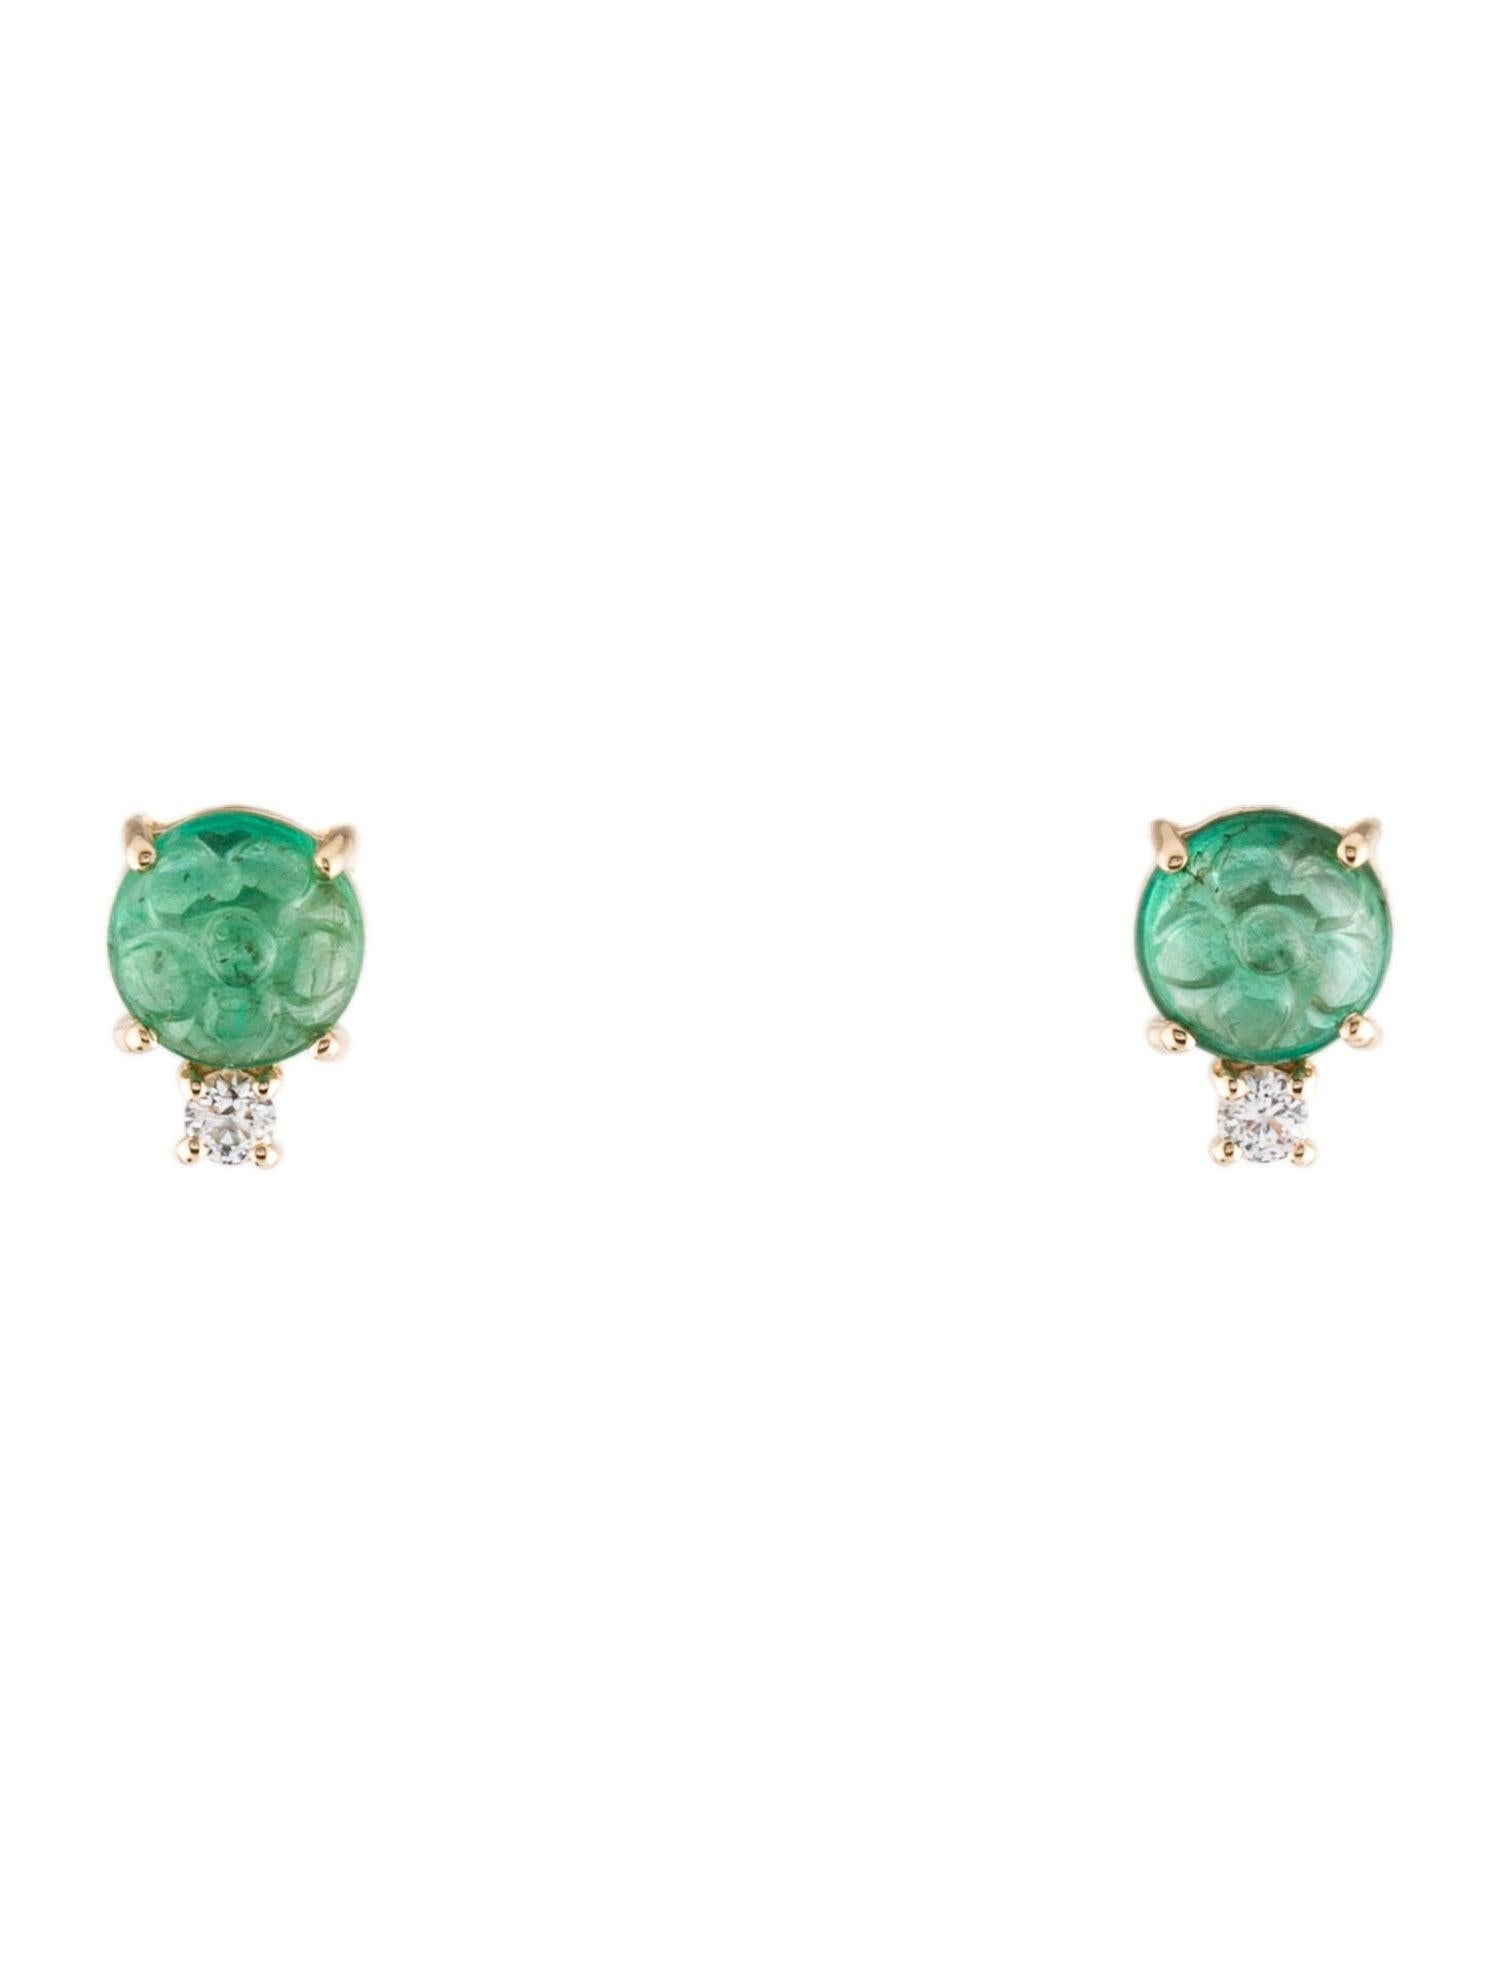 Immerse yourself in the enchanting allure of our Forest Ferns collection with these exquisite Emerald and White Sapphire earrings. Inspired by the verdant beauty of lush forests, these earrings are a celebration of nature's elegance and the